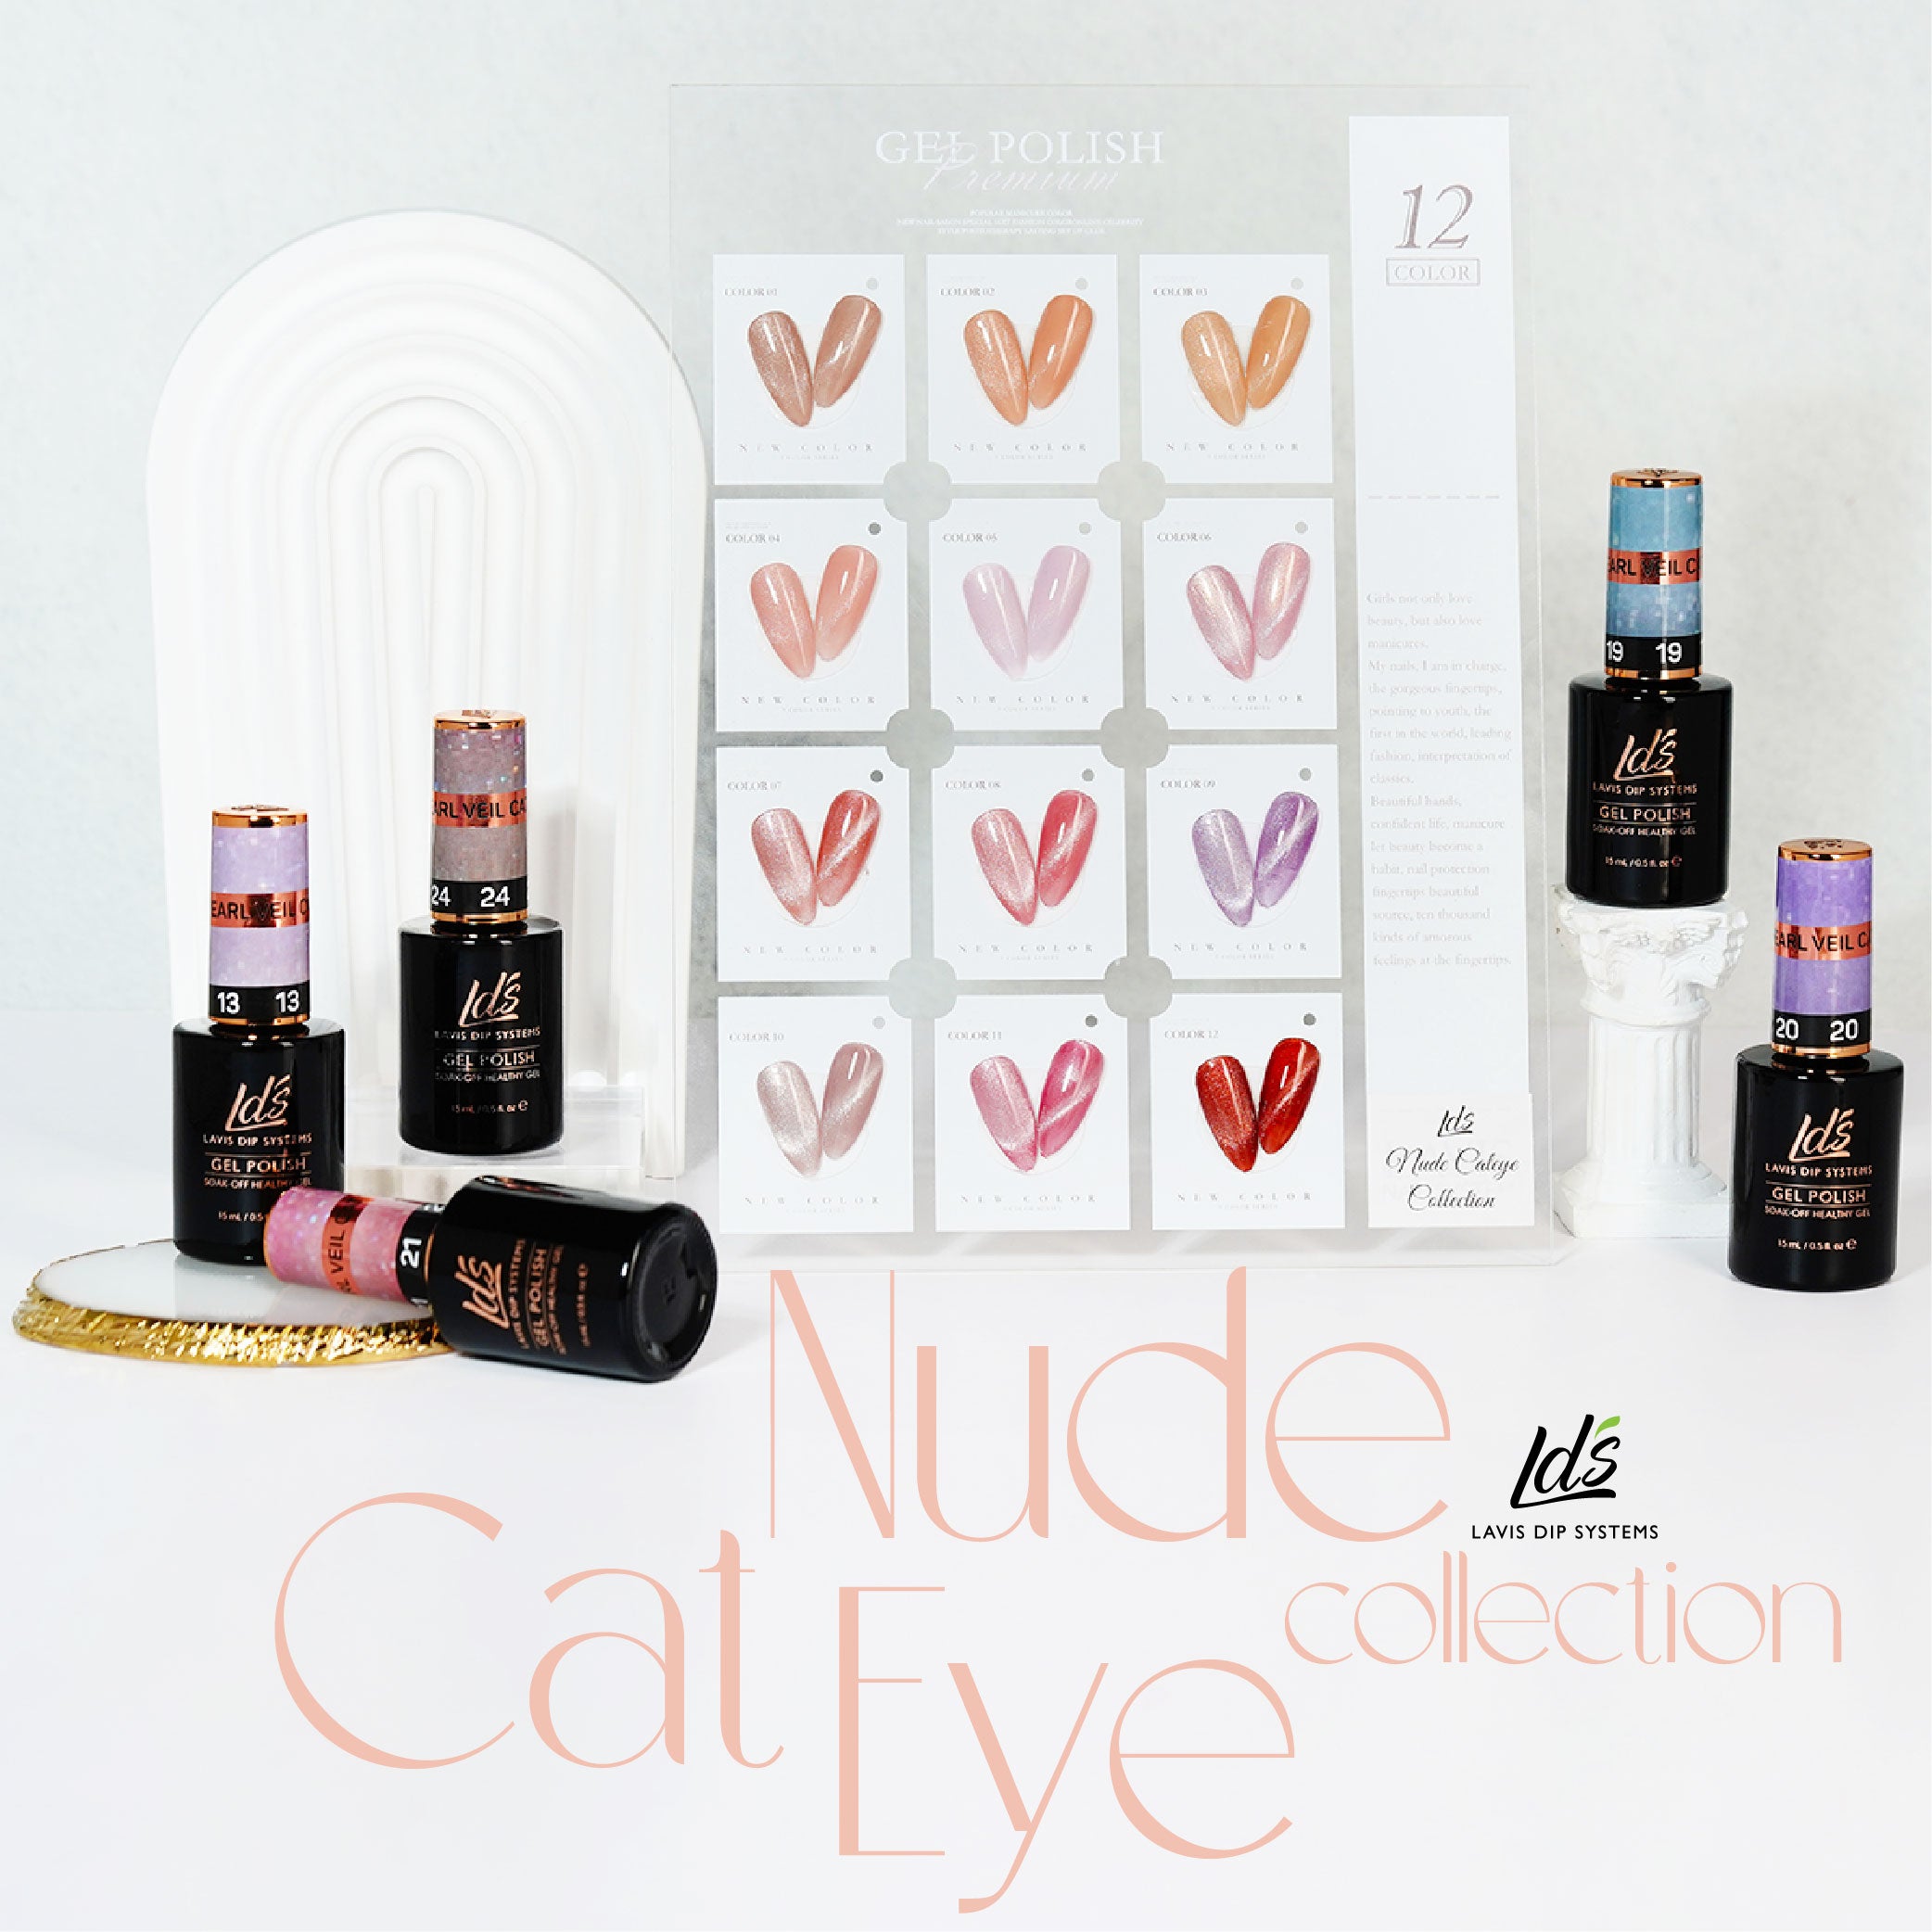 LDS Nude CE - 02 - Nude Cat Eyes Collection